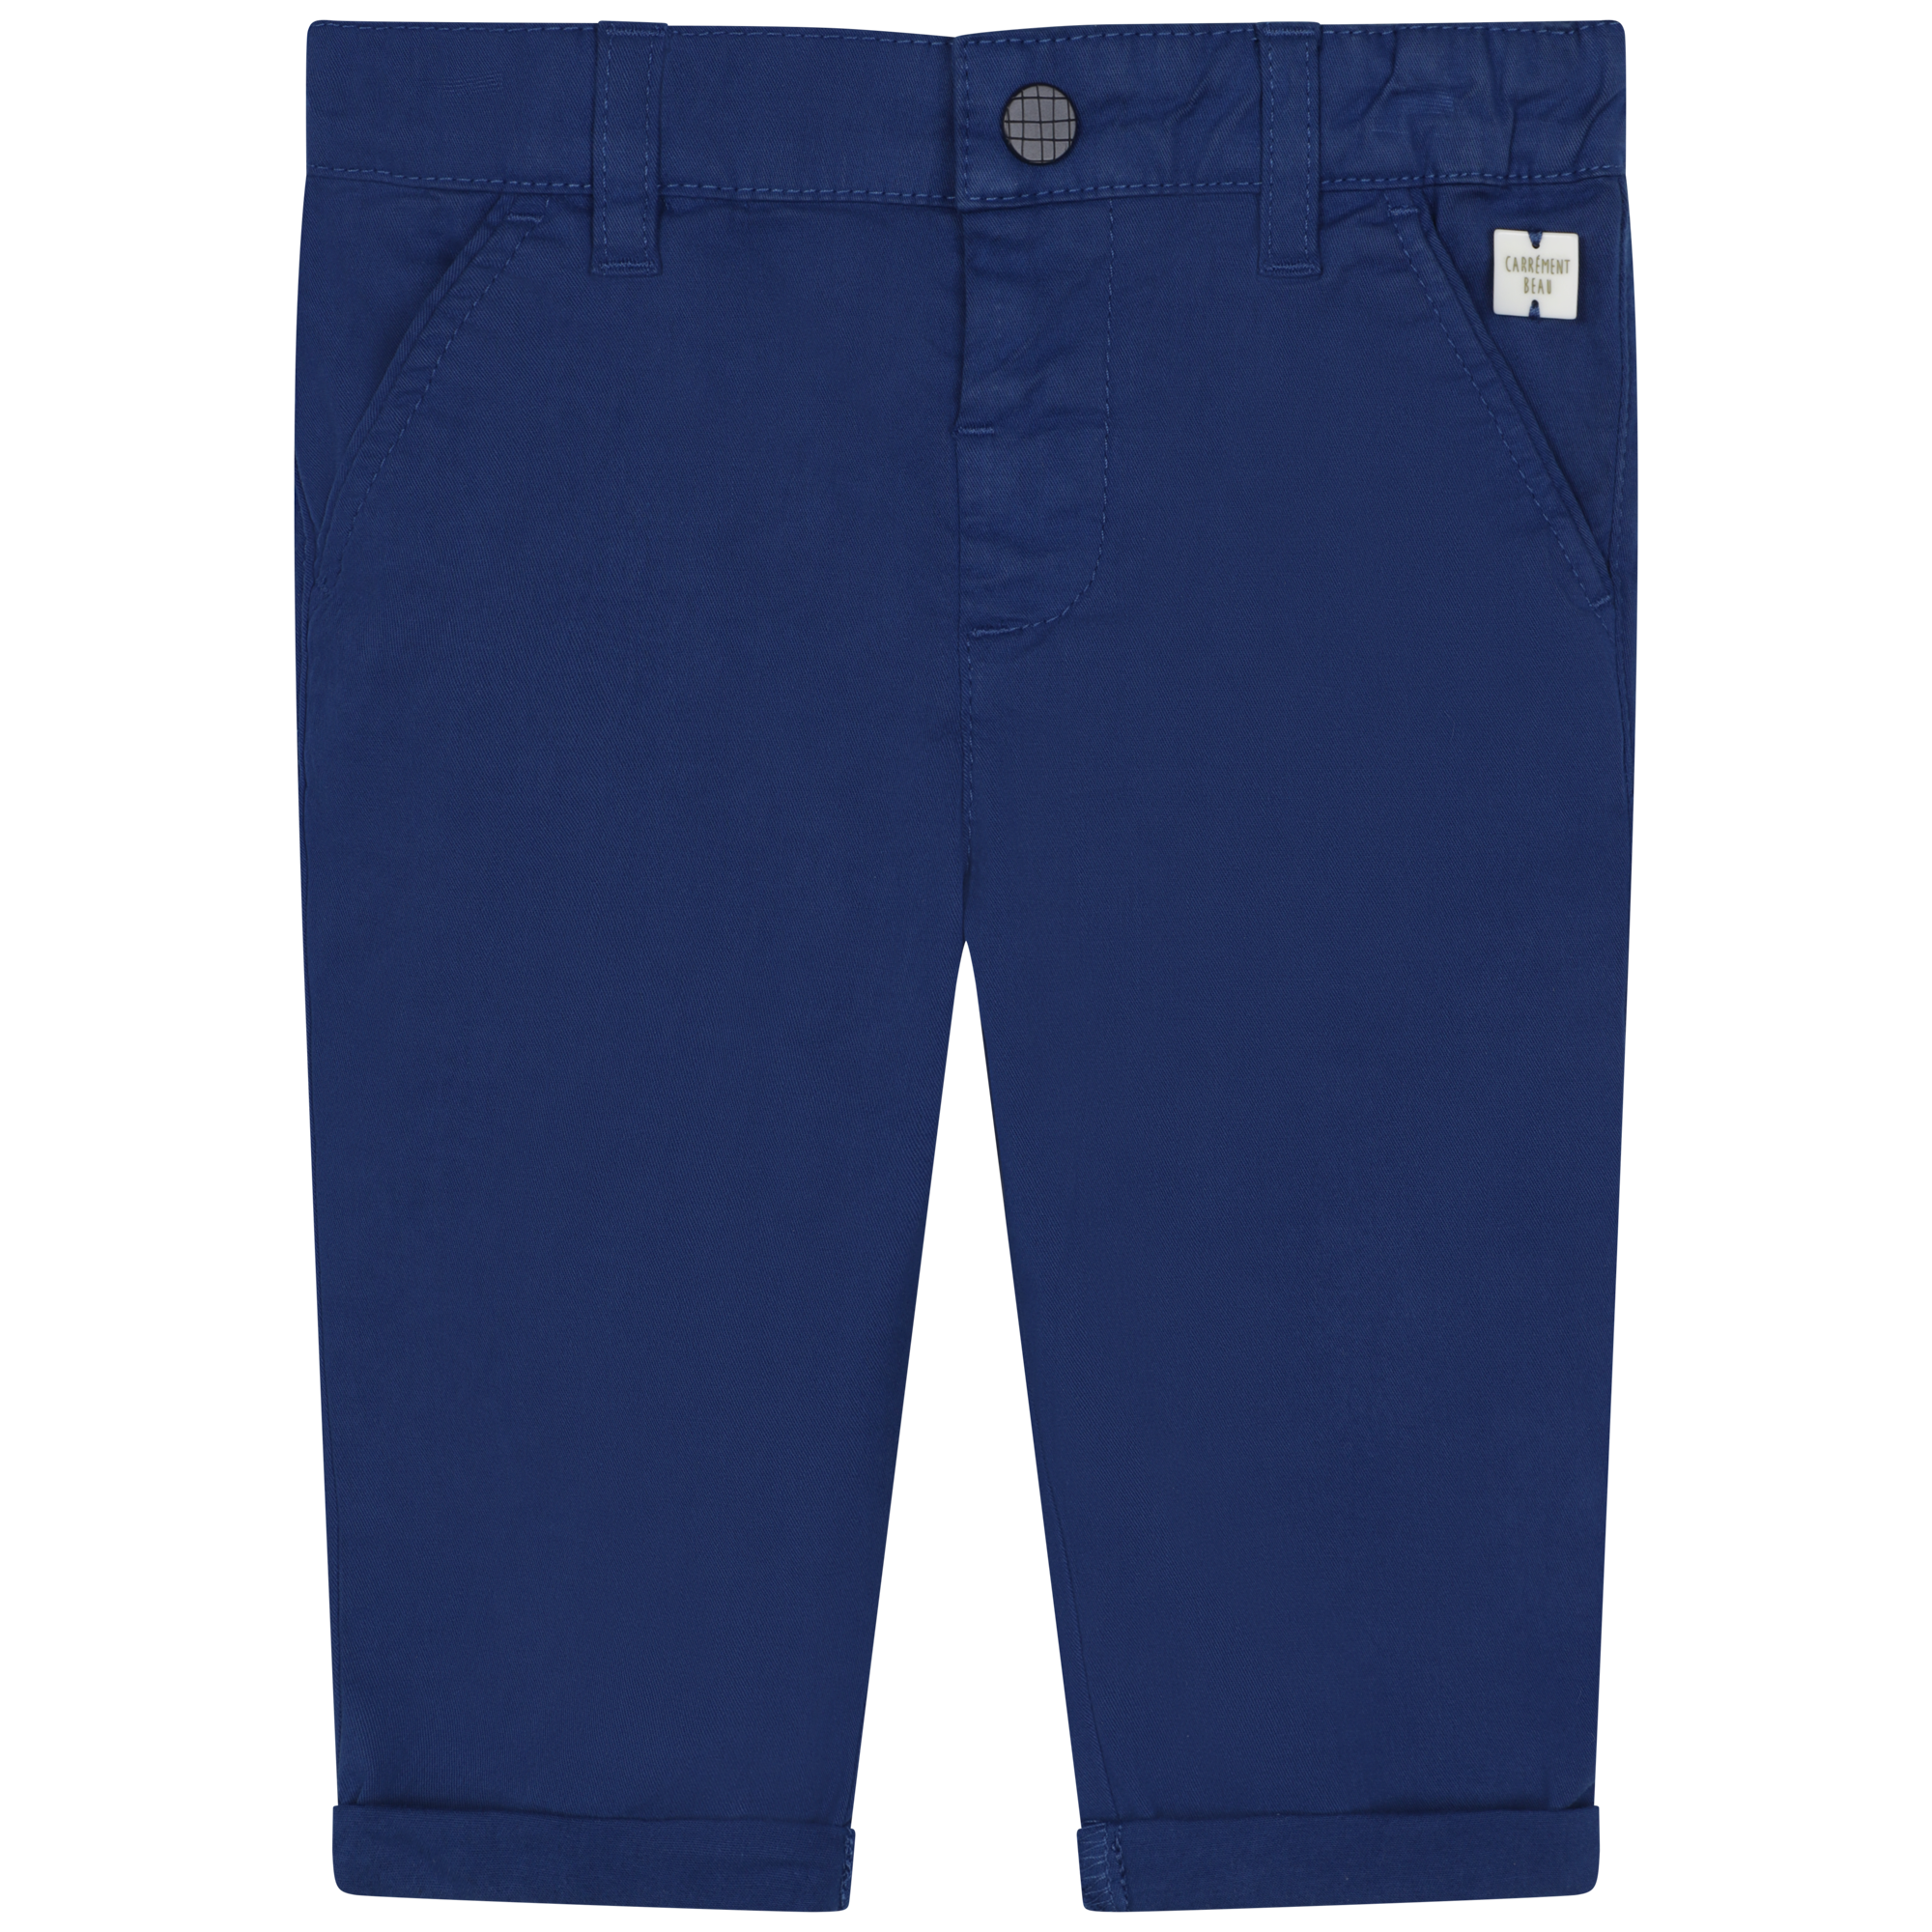 SHORT BOOSTER Class 1 Type A cut resistant trousers